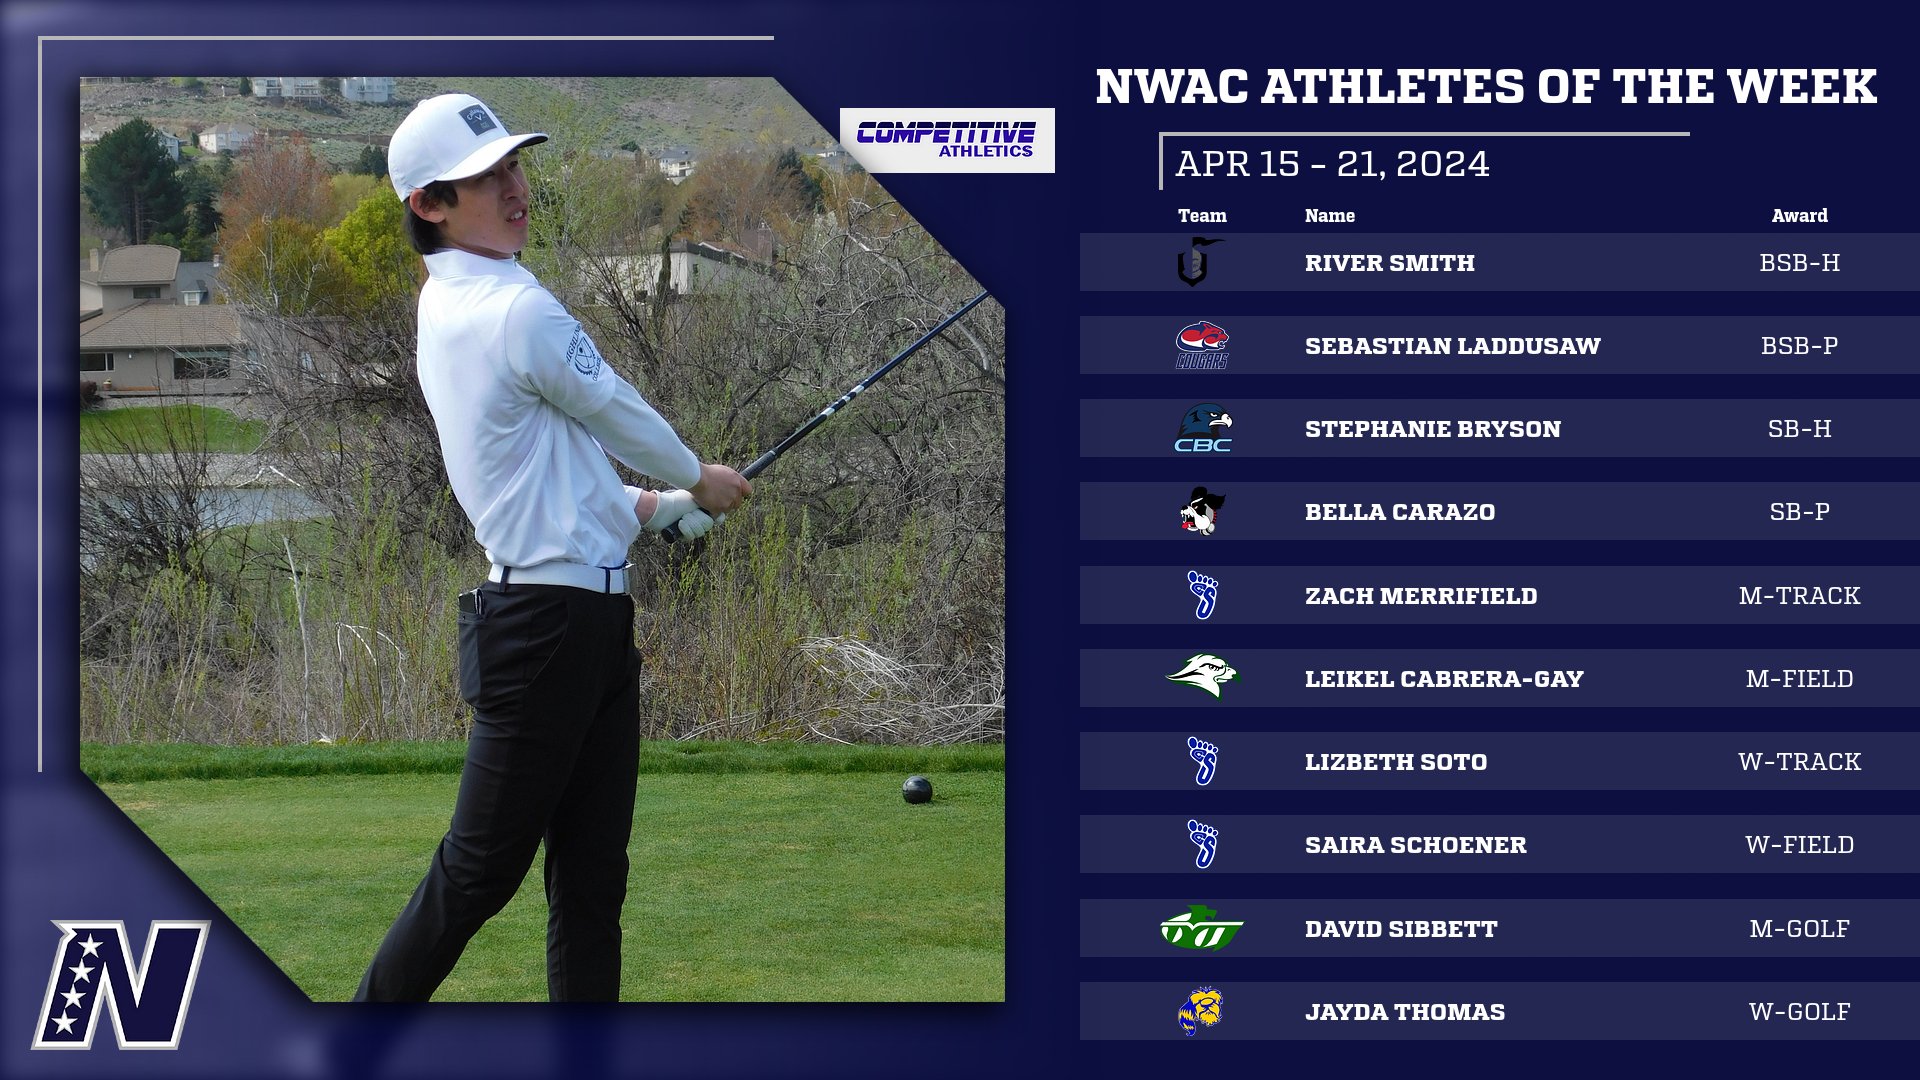 Competitive Athletics NWAC Athletes of the Week: April 15 - 21